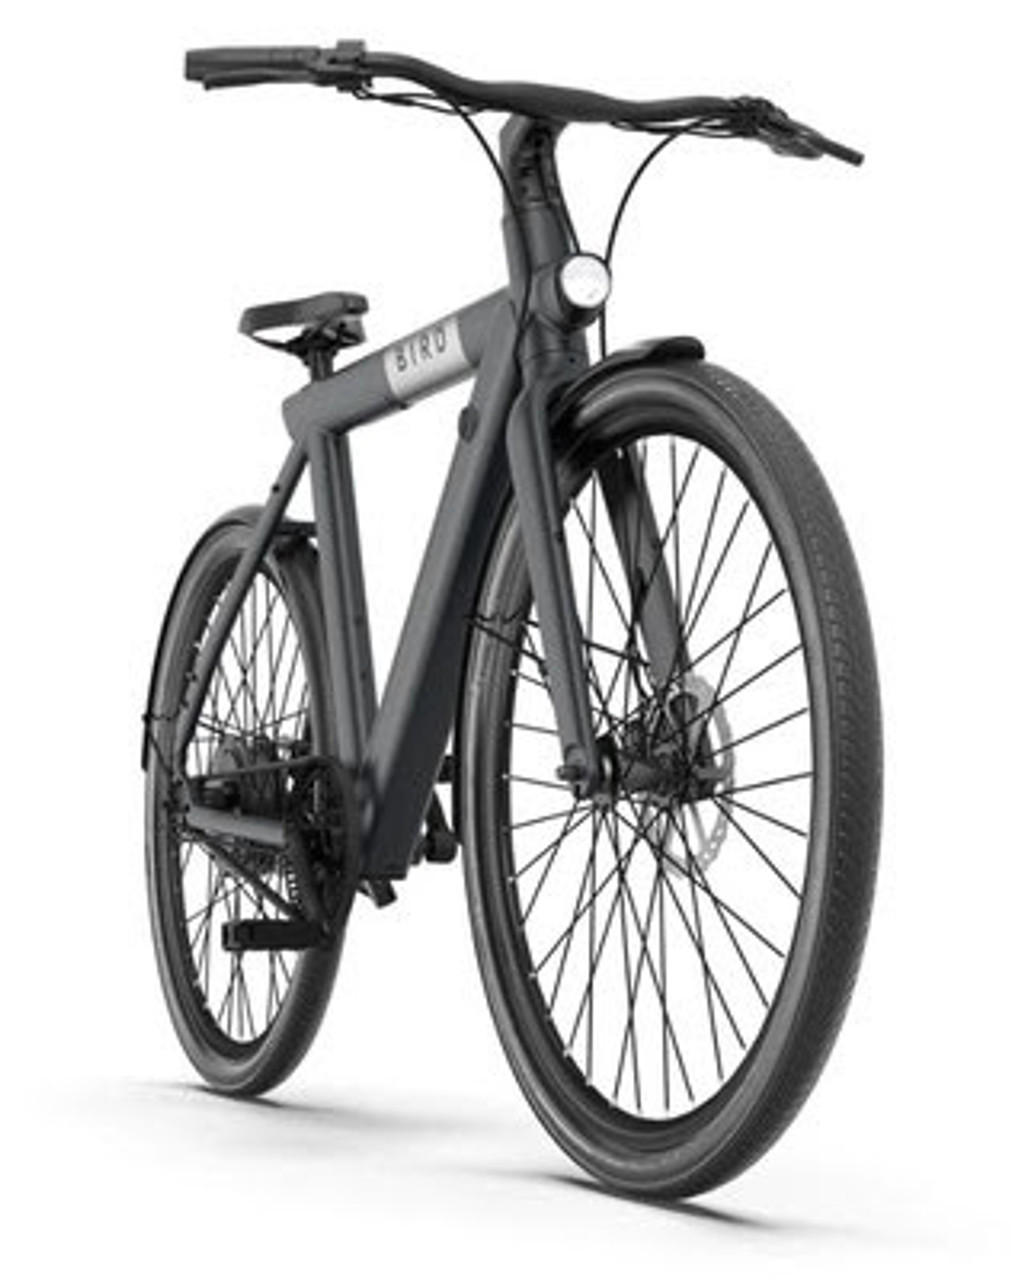 BIRDS A Frame Electric Bicycle For online sale Affordableatv